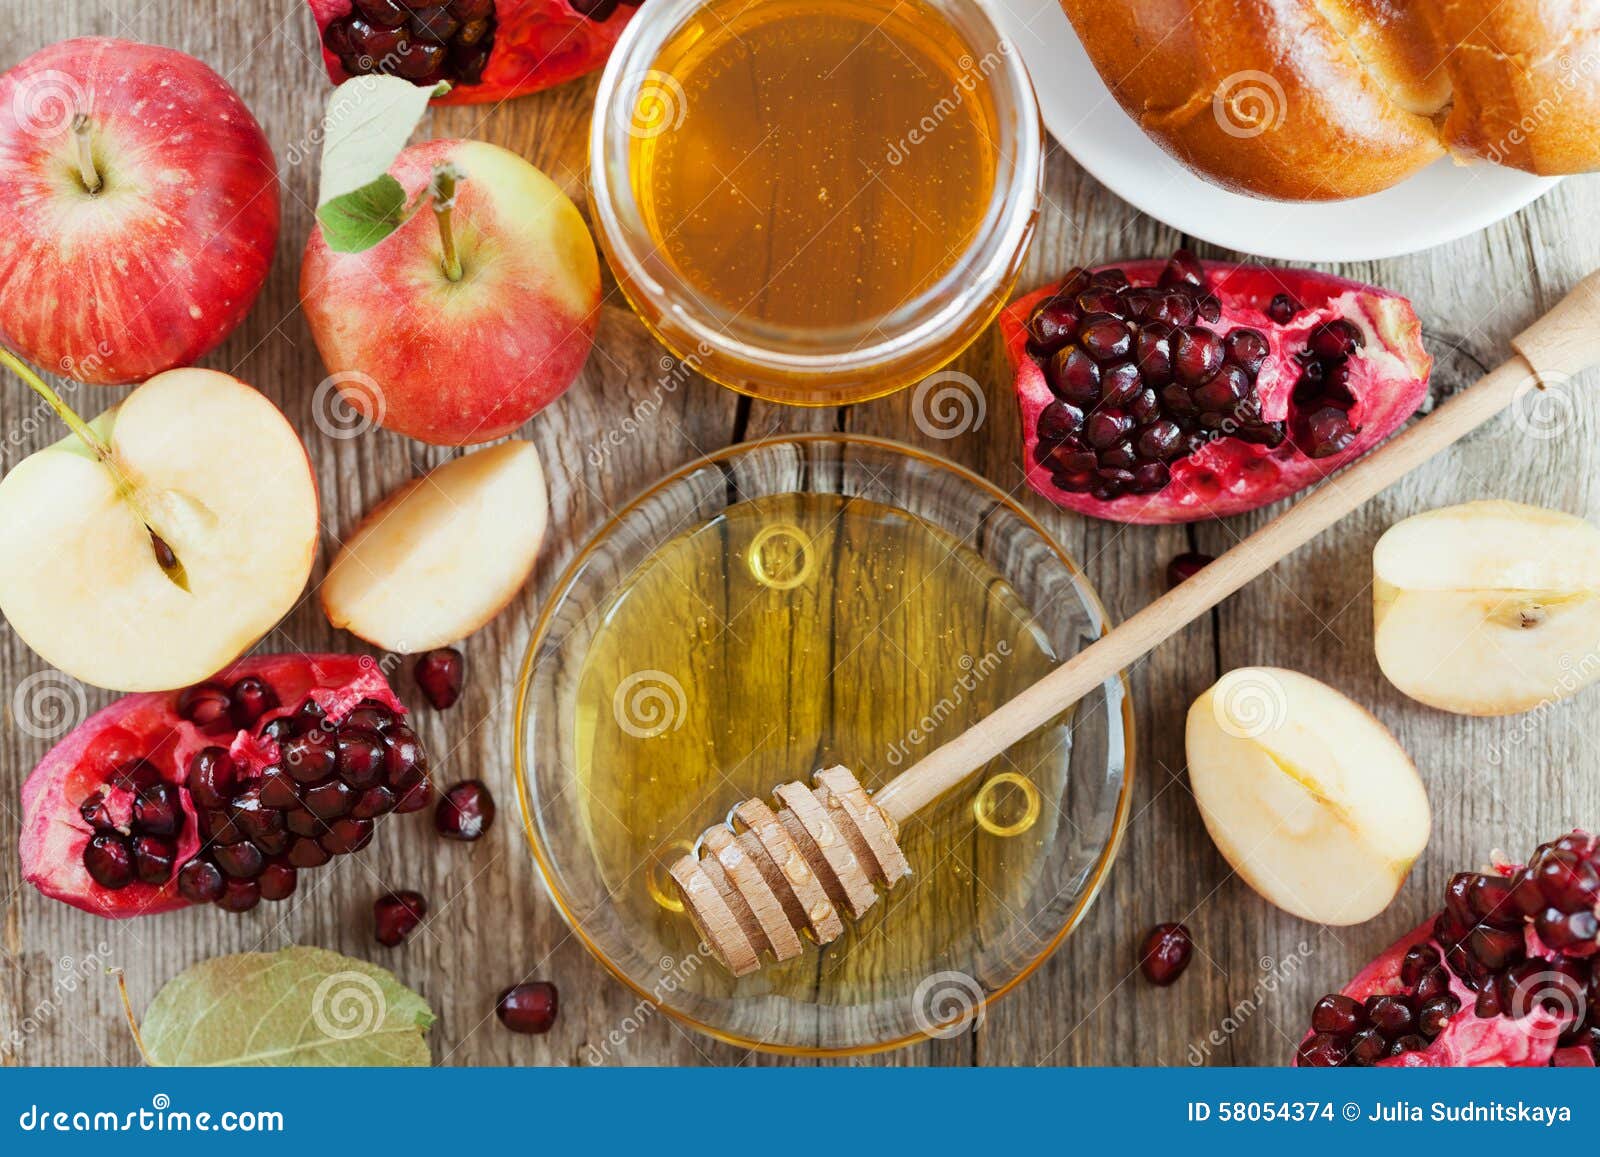 honey, apple, pomegranate and bread hala, table set with traditional food for jewish new year holiday, rosh hashana